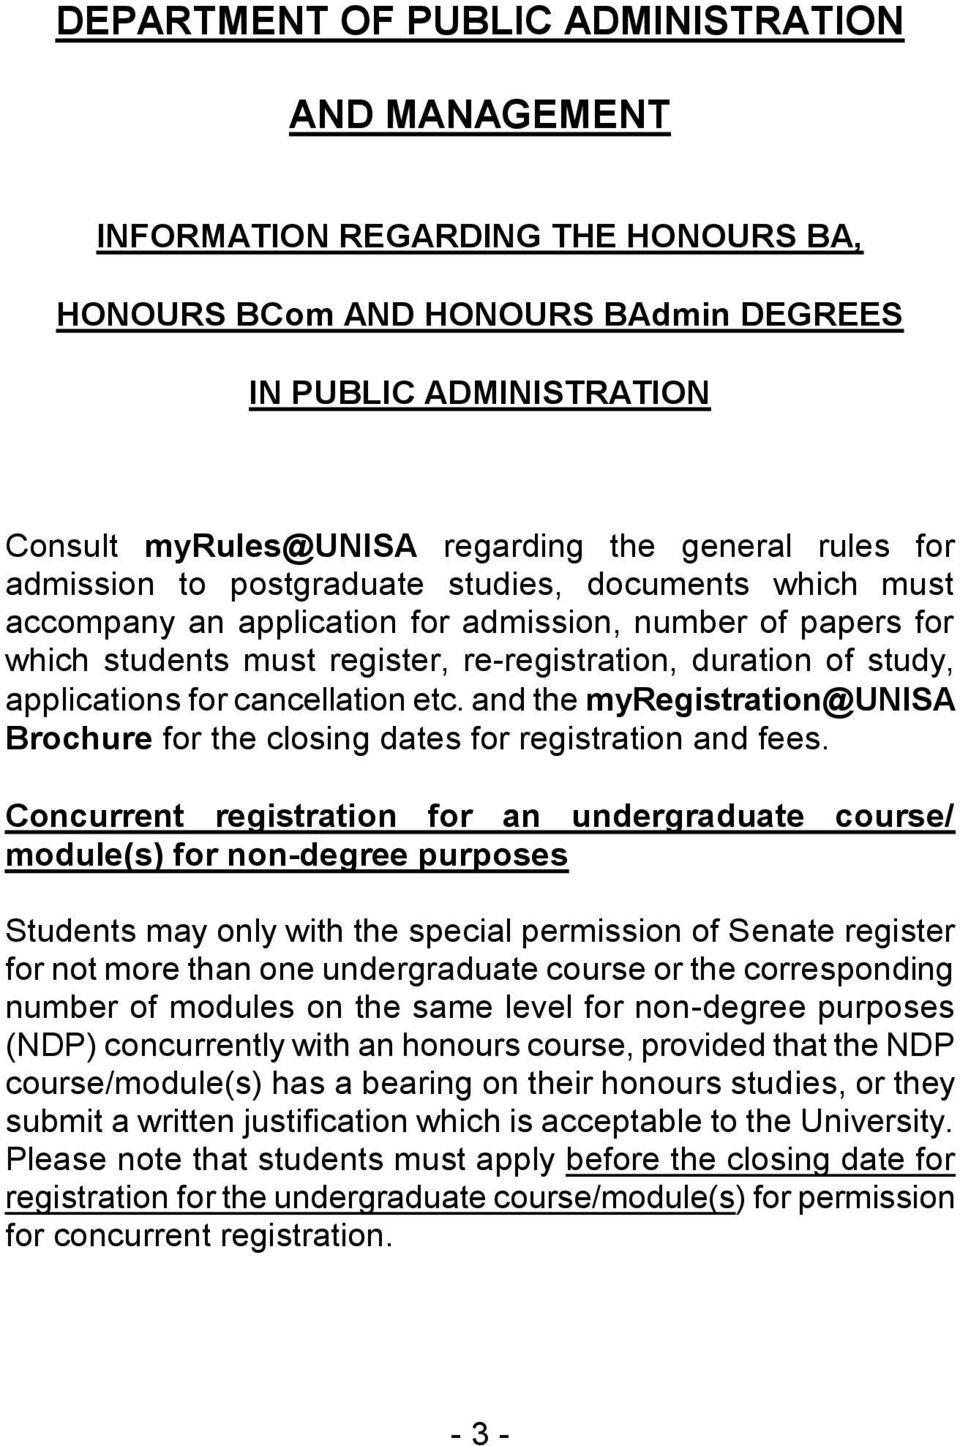 applications for cancellation etc. and the myregistration@unisa Brochure for the closing dates for registration and fees.